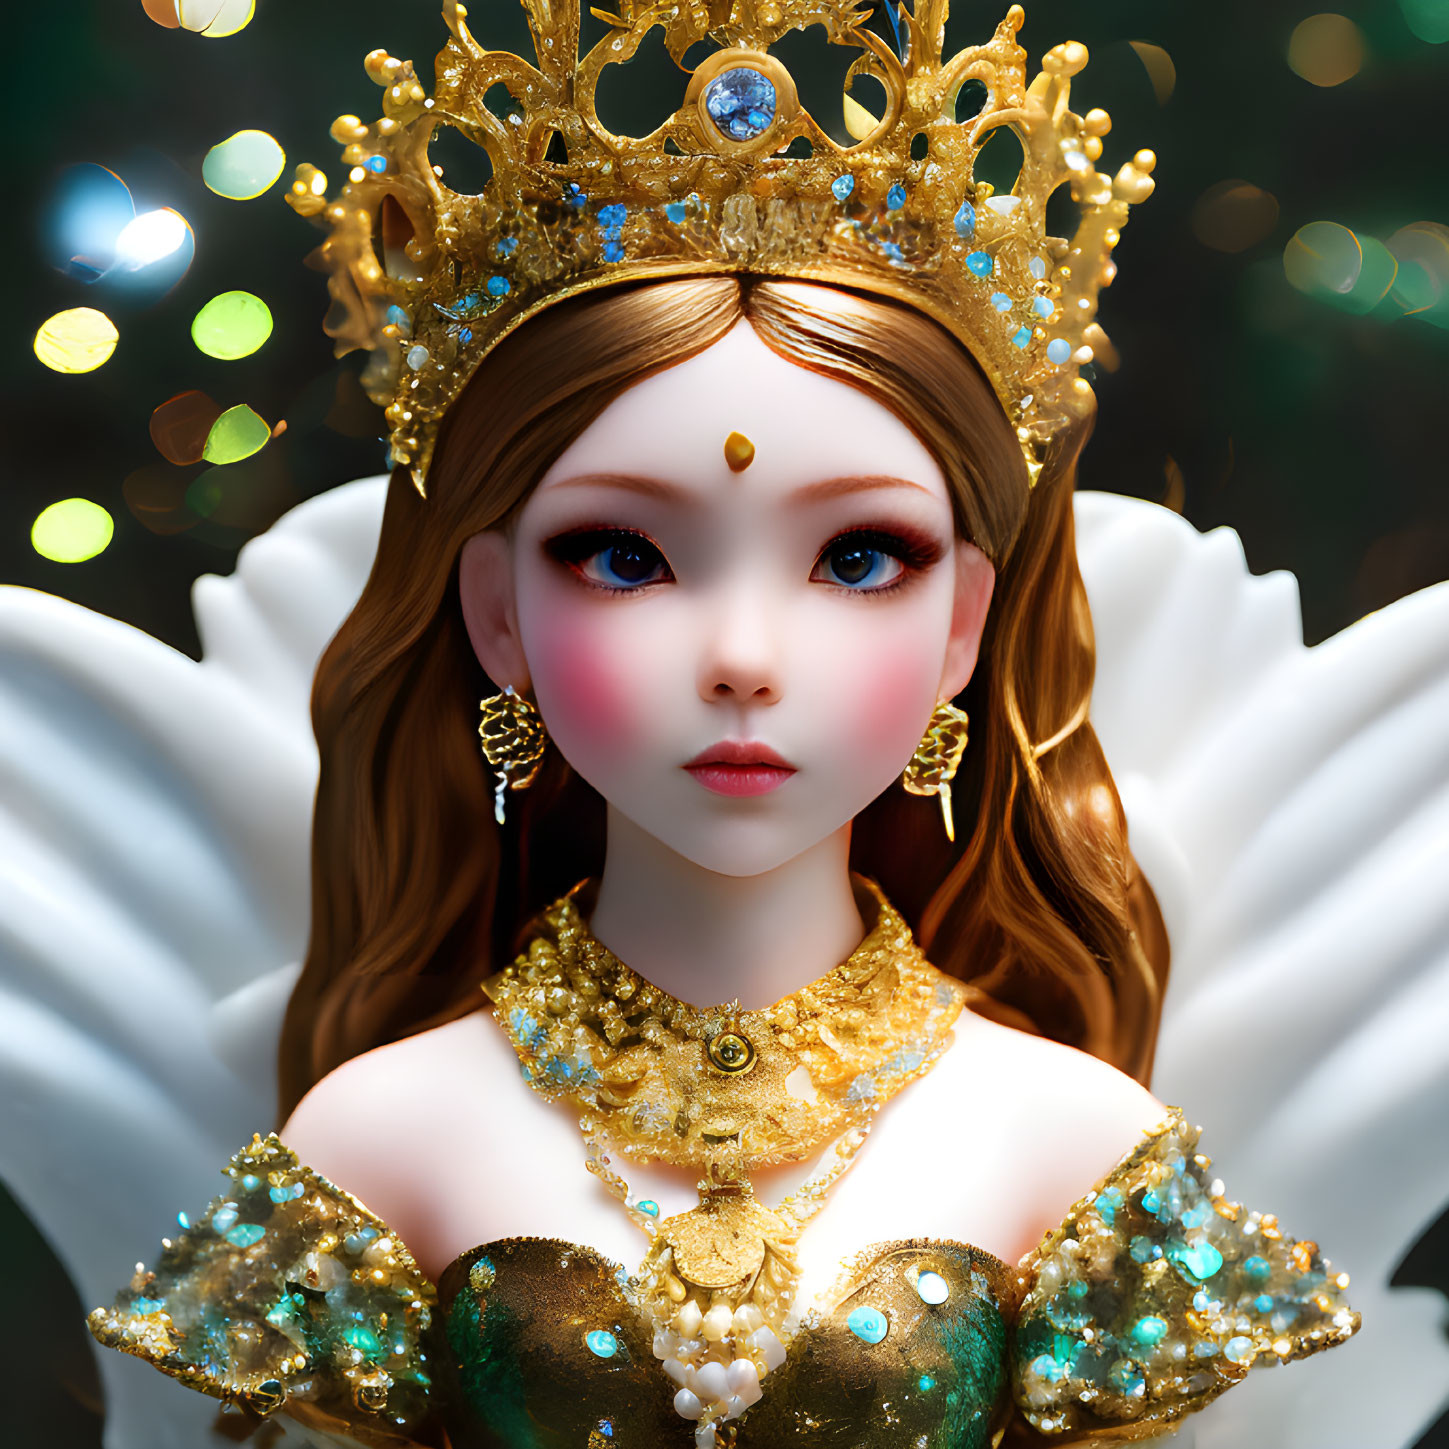 Regal doll with golden crown and jeweled attire on bokeh background